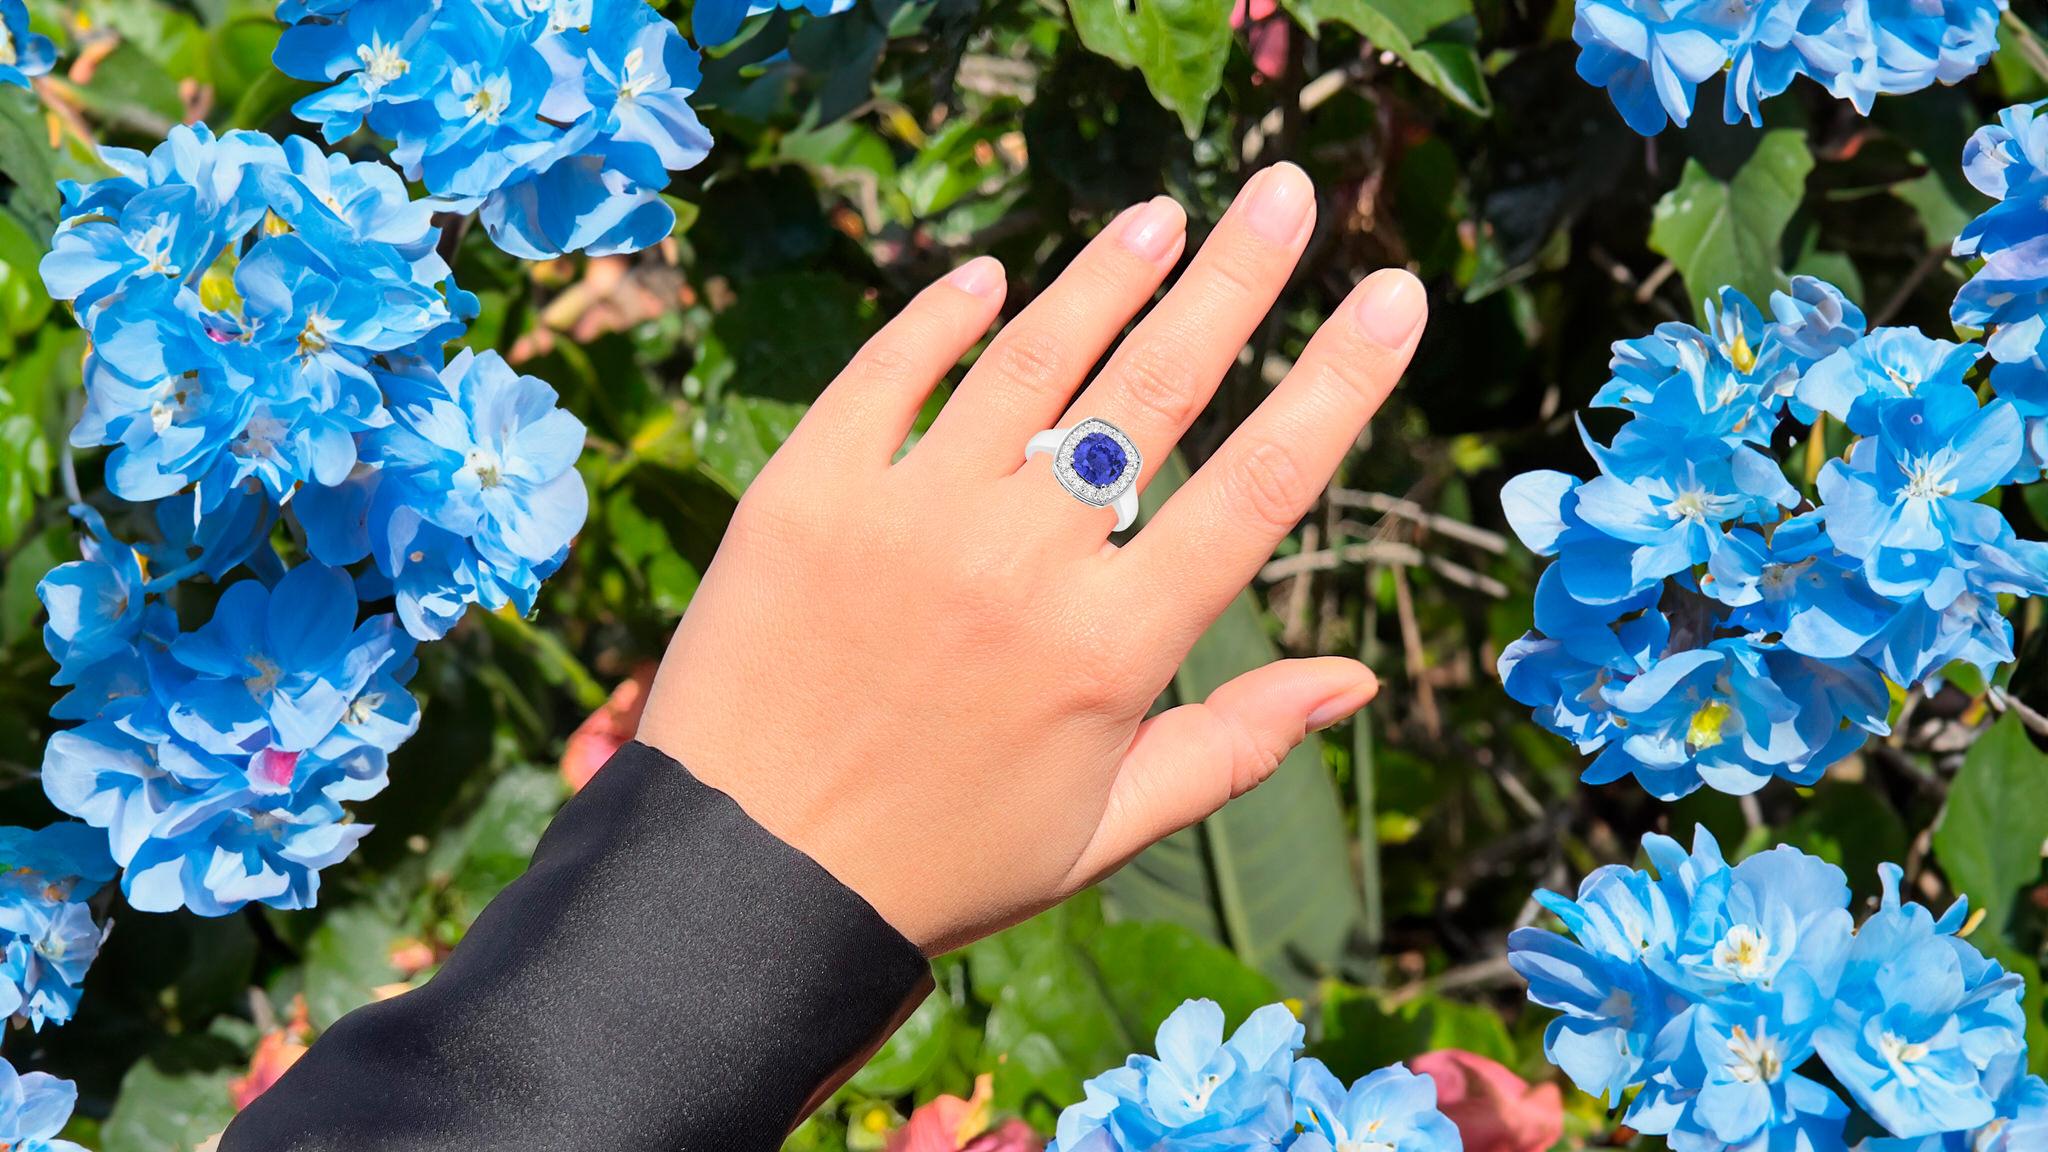 It comes with the Gemological Appraisal by GIA GG/AJP
All Gemstones are Natural
Tanzanite = 2.10 Carat
16 Diamonds = 0.48 Carats
Metal: 14K White Gold
Ring Size: 7* US
*It can be resized complimentary